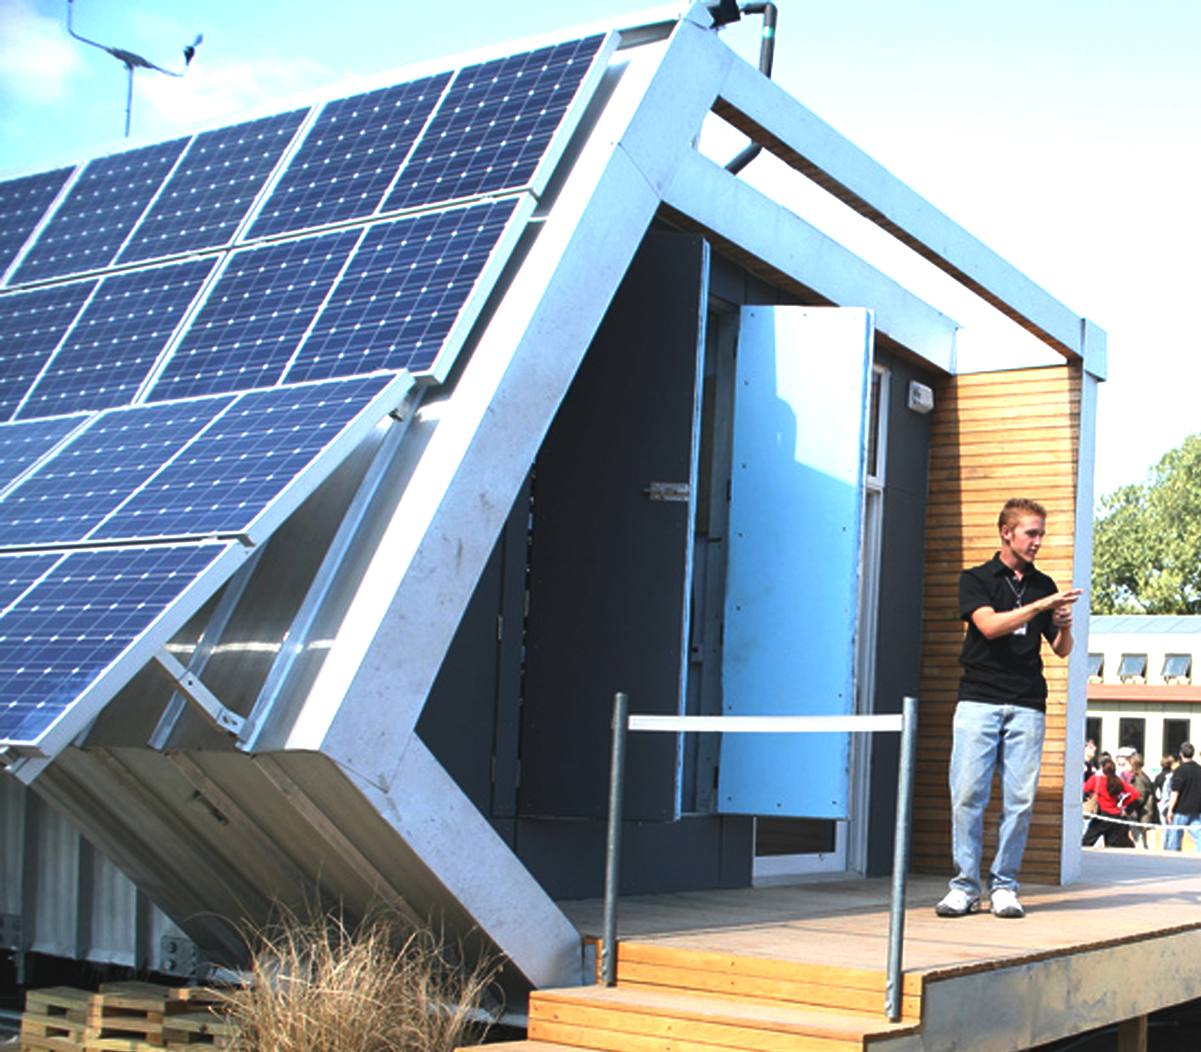 Sunstainable Houses Eco solar homes mortgages for first time buyers